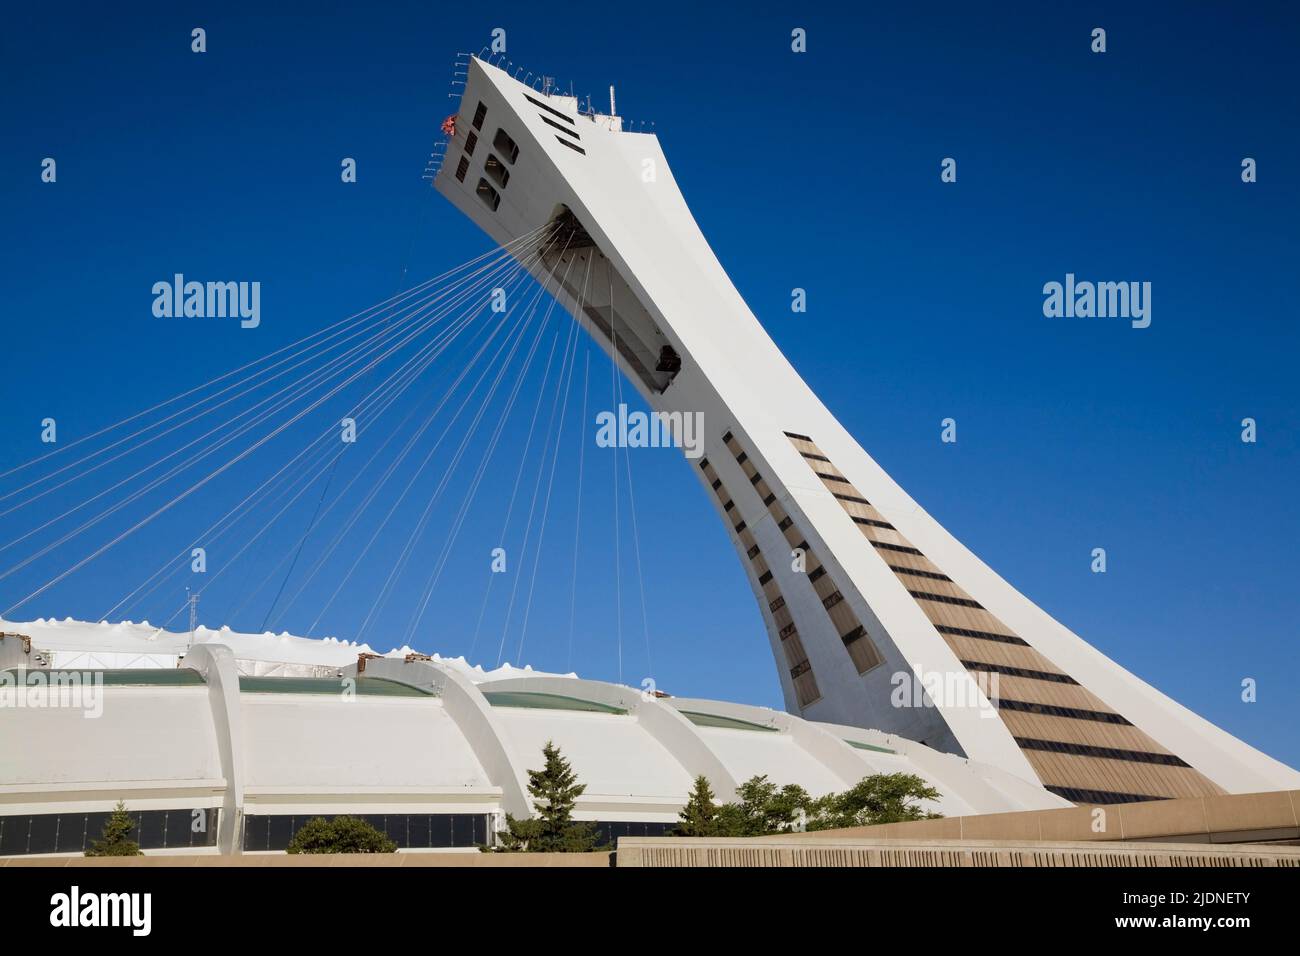 The Montreal Tower at the Olympic Stadium park in summer, Montreal, Quebec, Canada. Stock Photo